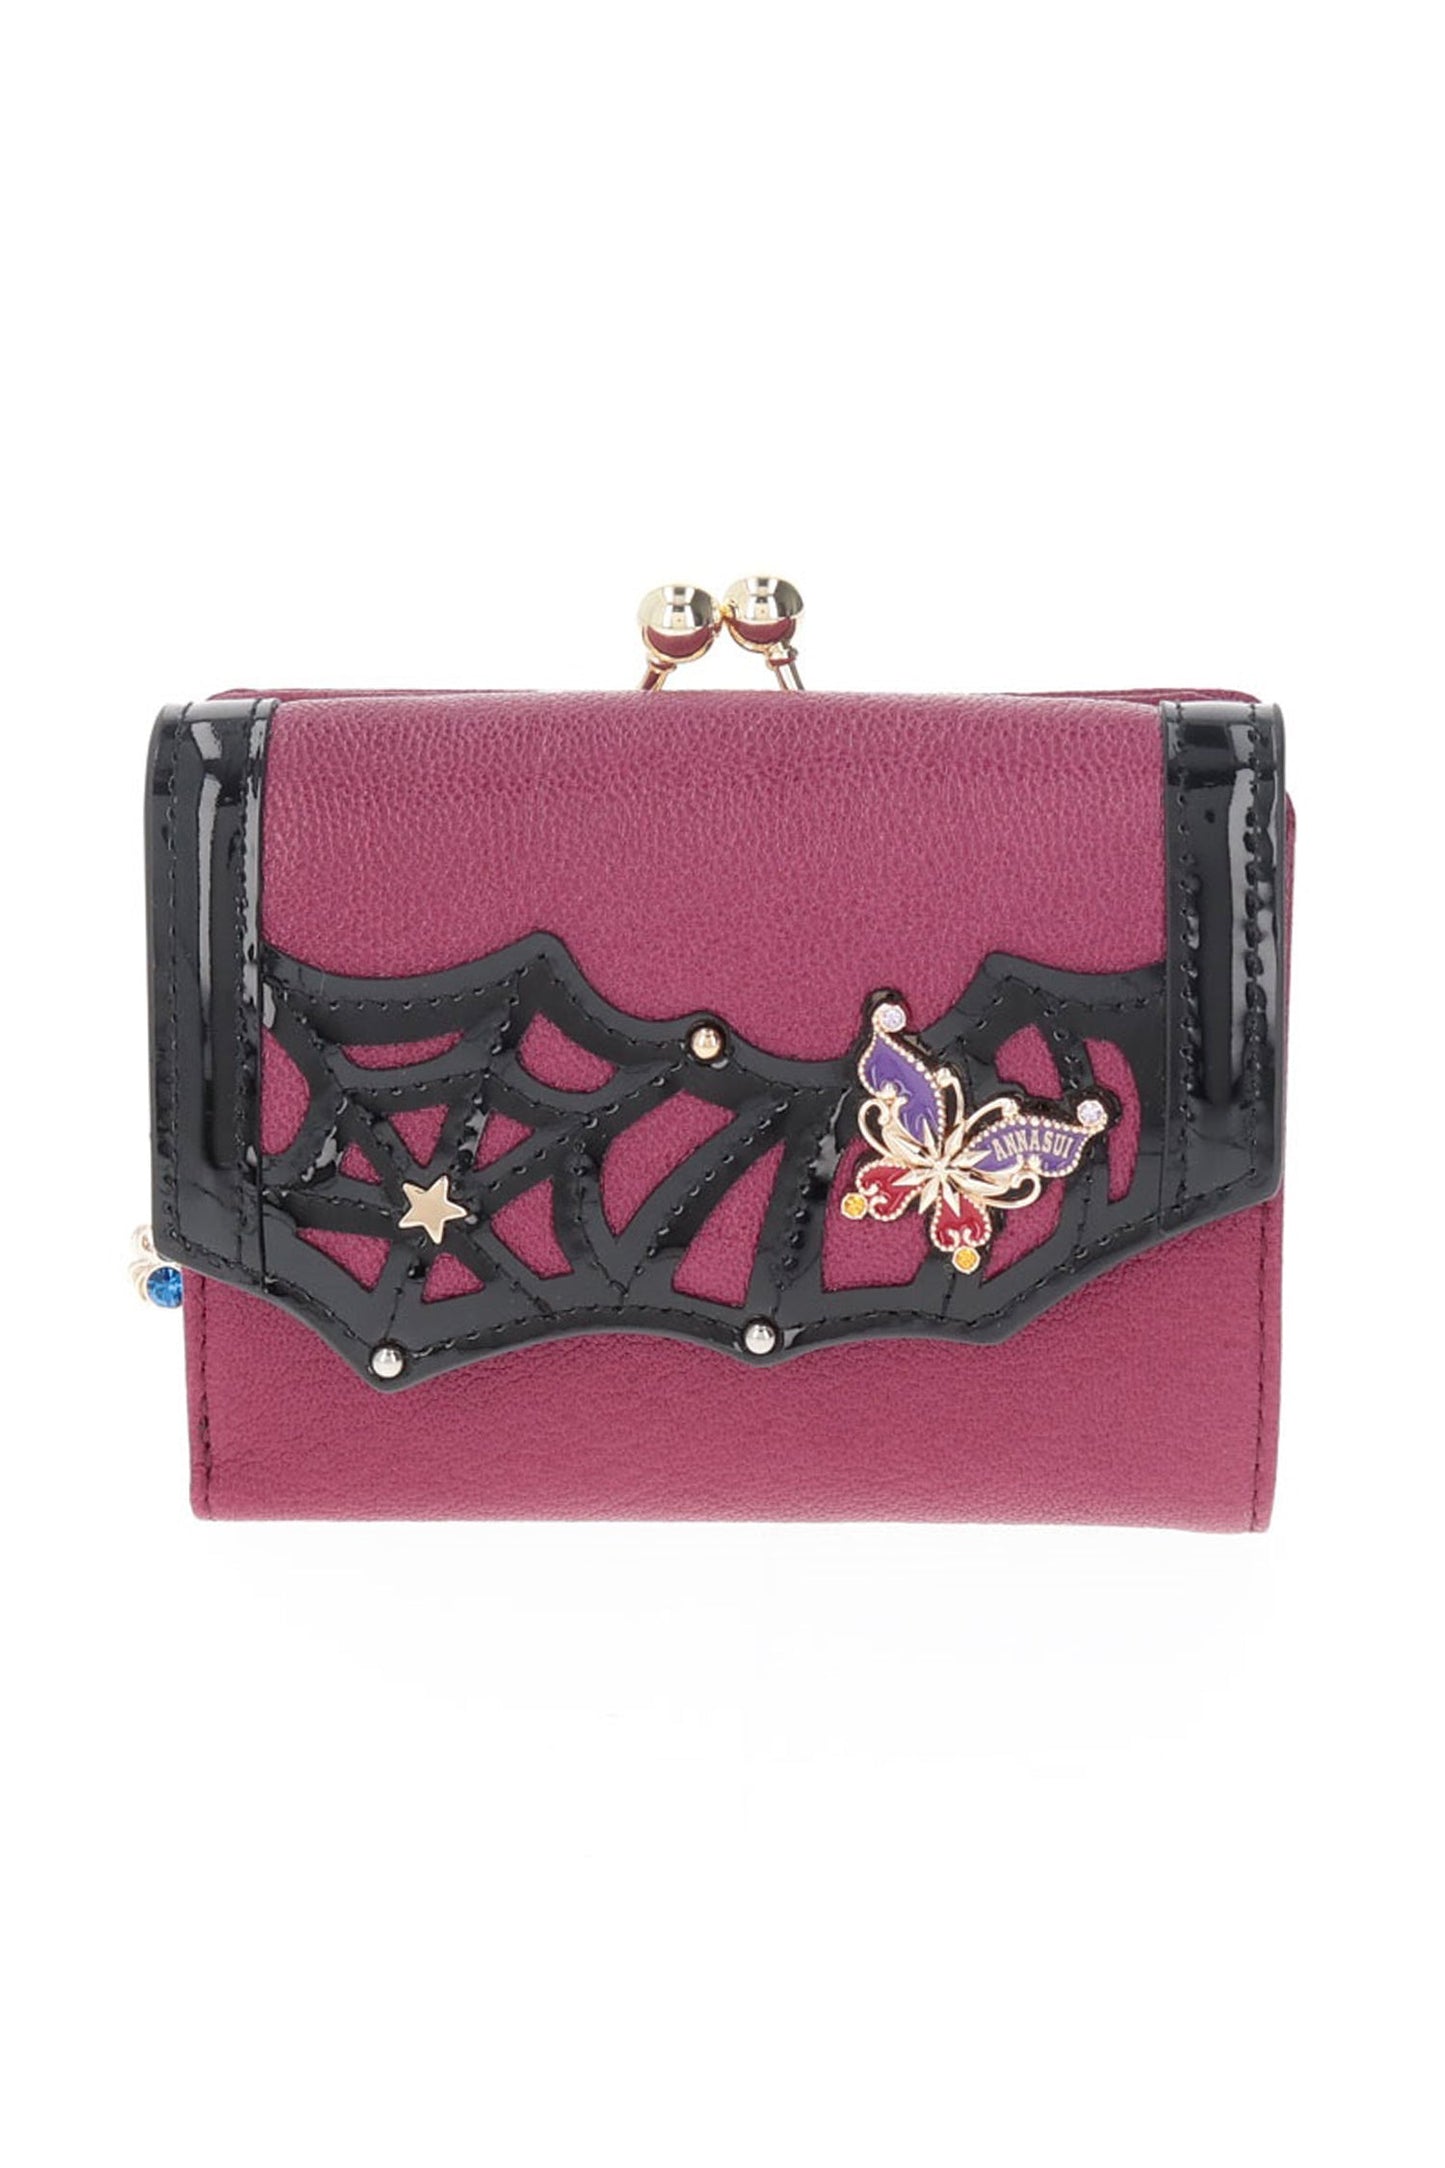 Poison Clasp Bi-fold Wallet Bordeaux, flap like a black spiderweb with a butterfly, star on top